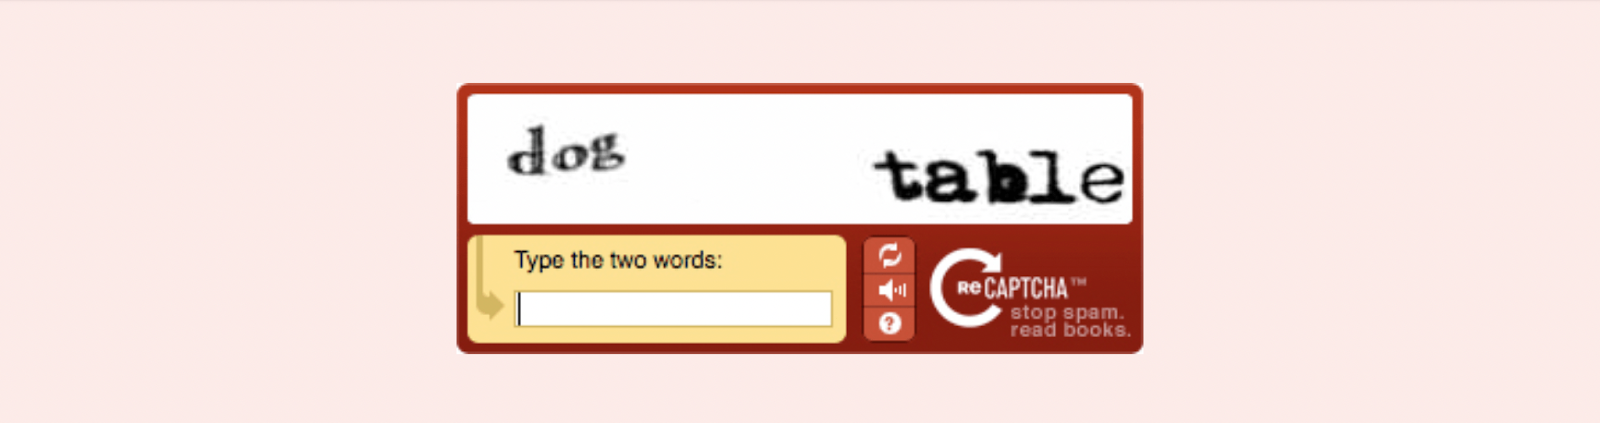 example of a CAPTCHA where the user types two words